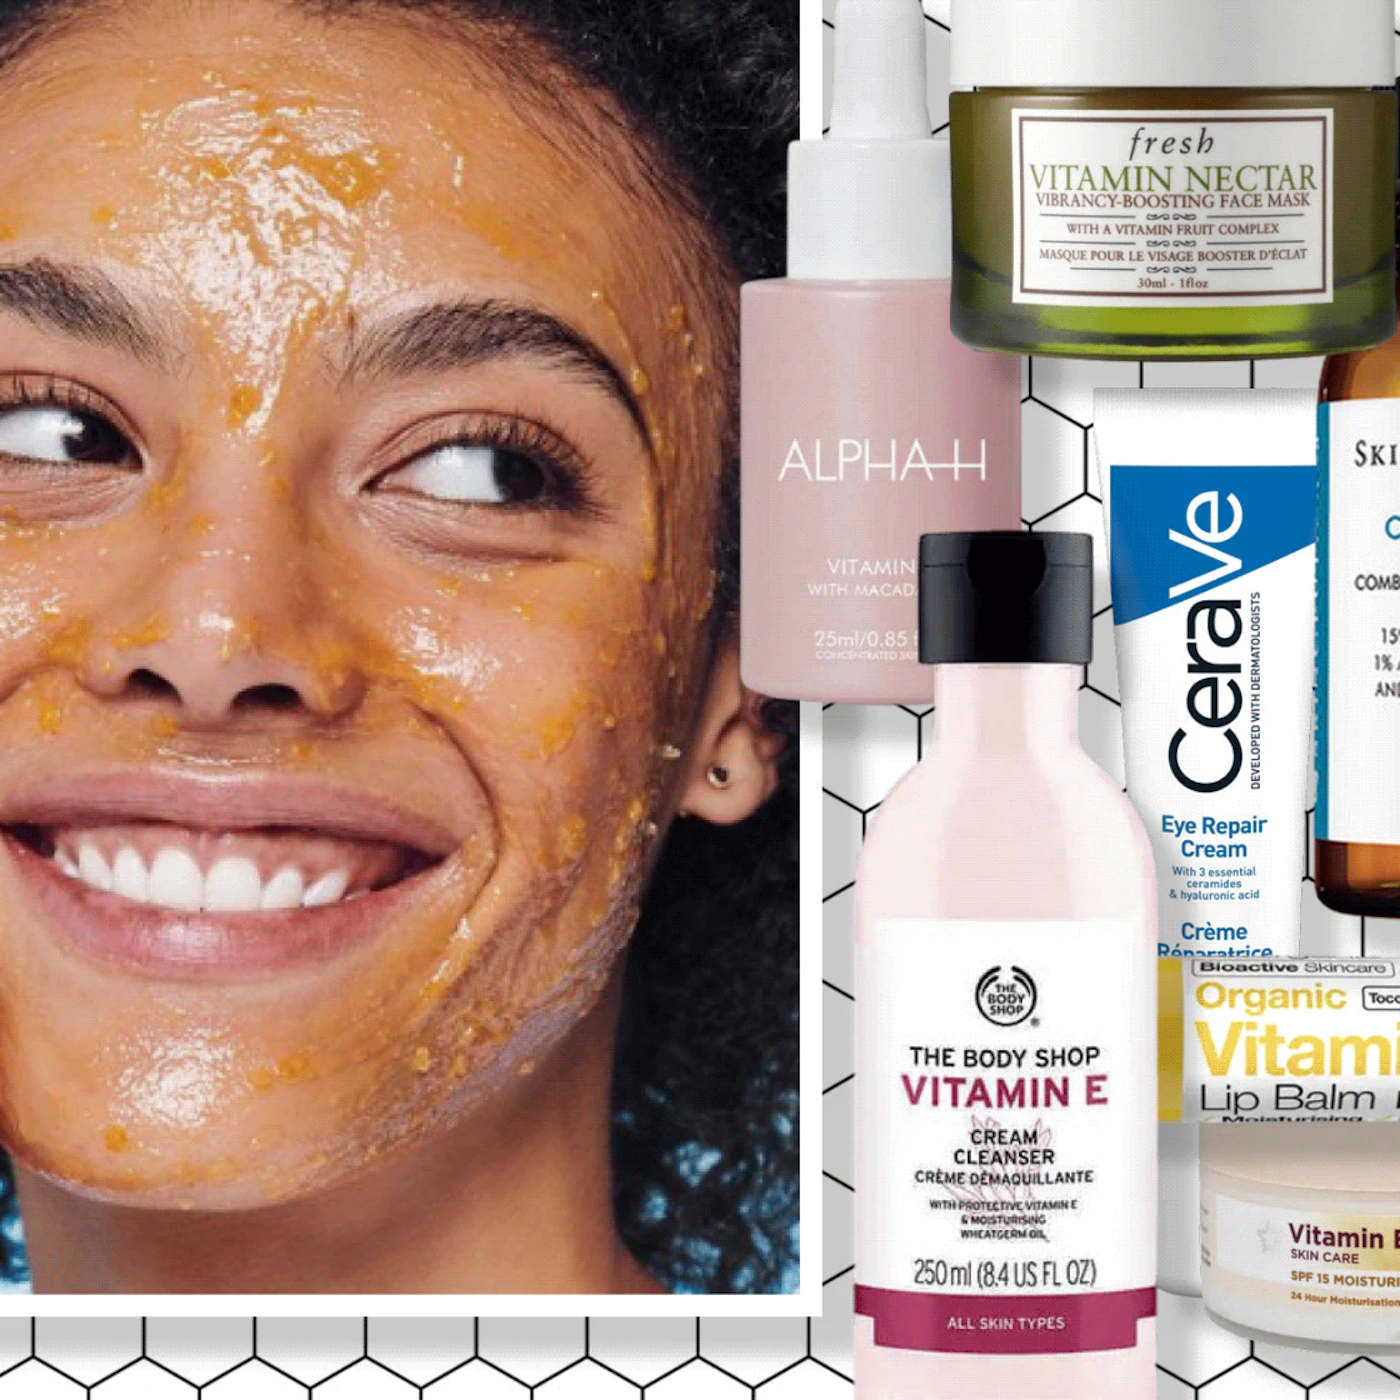 Vitamin E in skincare: what is it and what are the benefits?